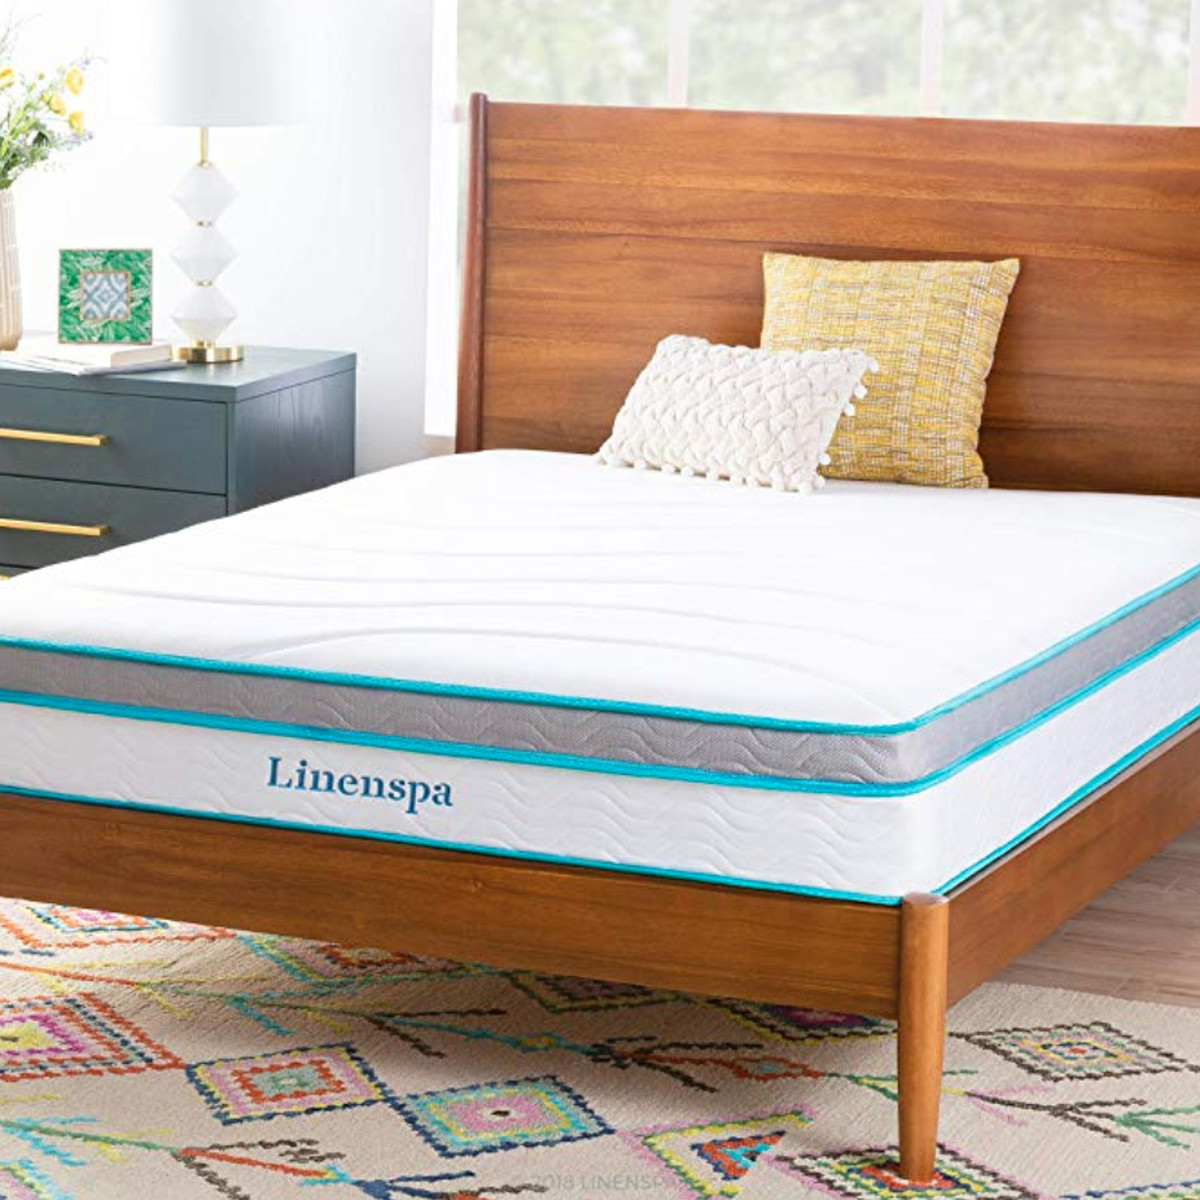 A white uncovered mattress sits on a wooden bed platform and headboard. A colorful patterned rug is underneath. 